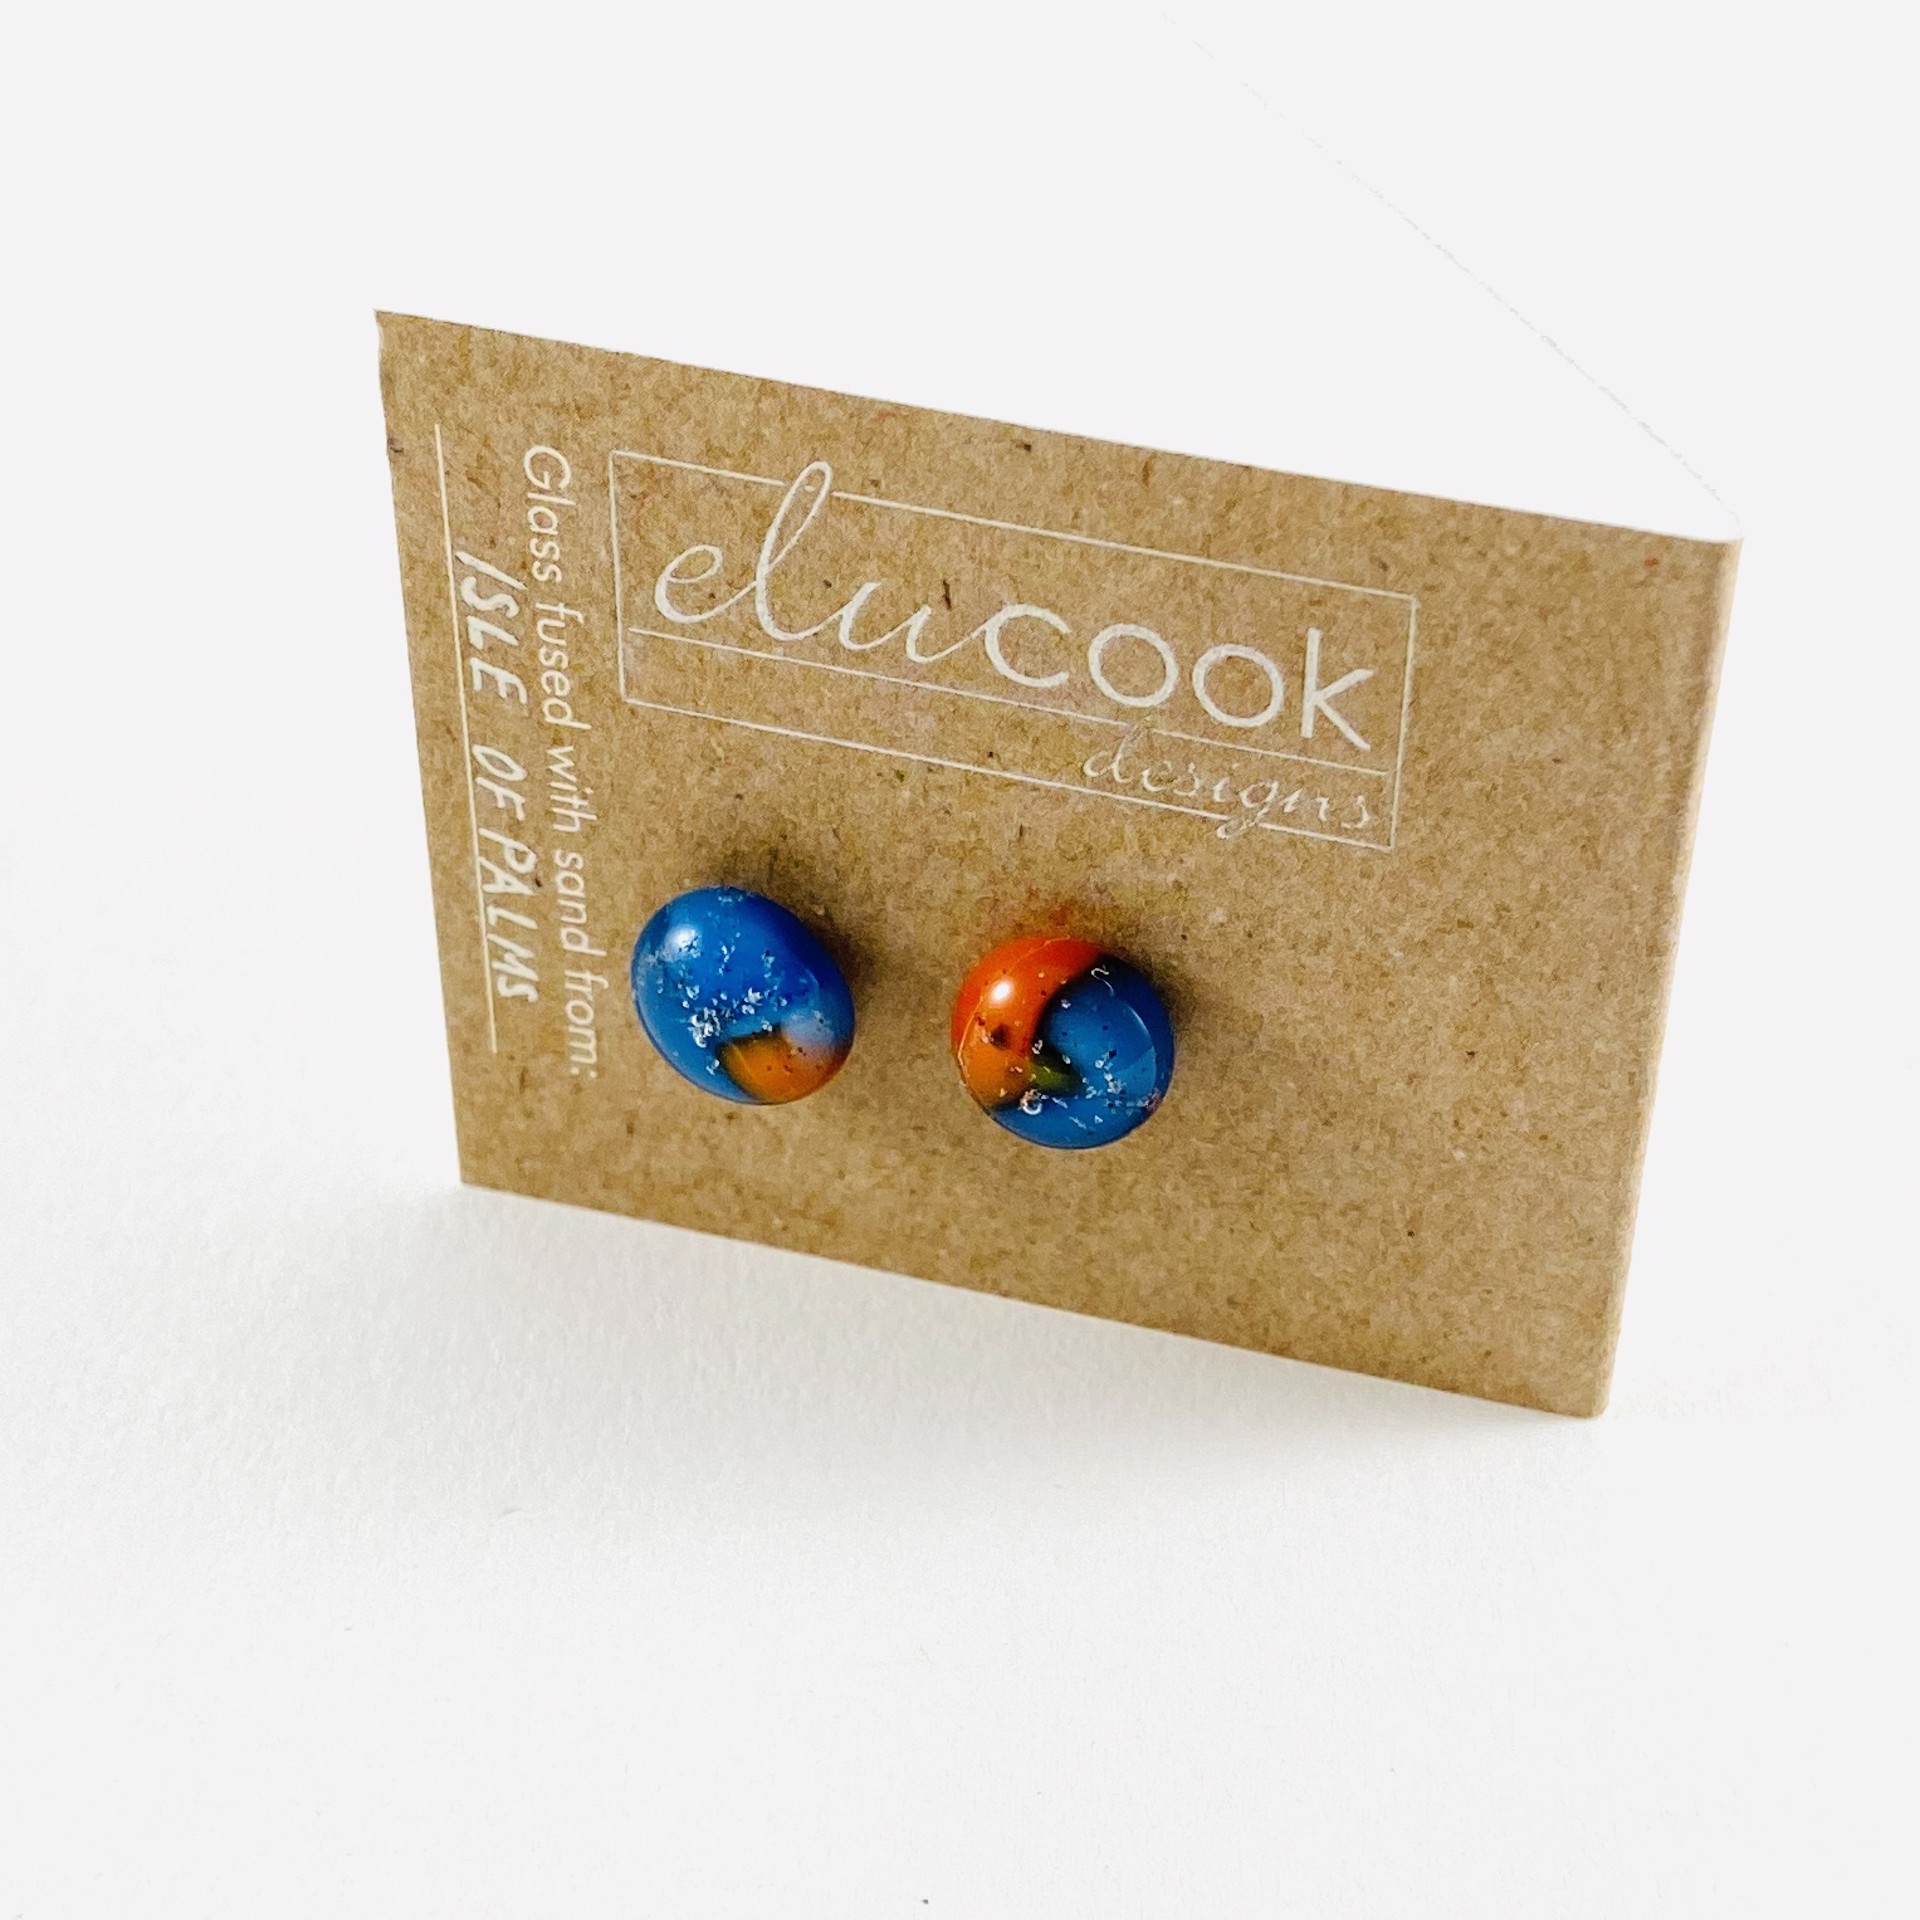 Button Earrings, 8x by Emily Cook